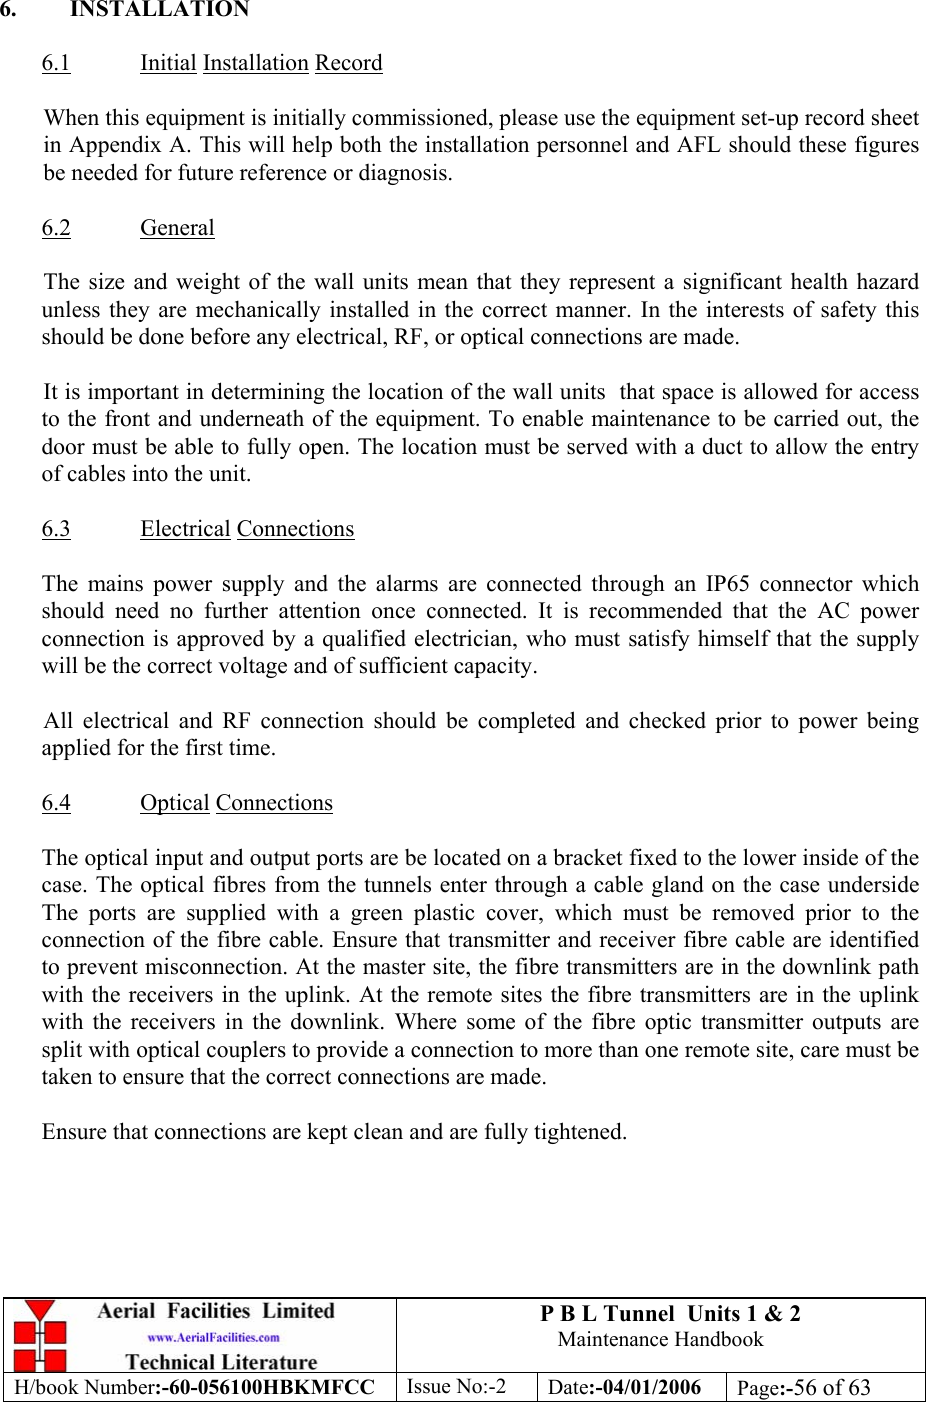 P B L Tunnel  Units 1 &amp; 2 Maintenance Handbook H/book Number:-60-056100HBKMFCC  Issue No:-2  Date:-04/01/2006  Page:-56 of 63   6. INSTALLATION  6.1 Initial Installation Record  When this equipment is initially commissioned, please use the equipment set-up record sheet in Appendix A. This will help both the installation personnel and AFL should these figures be needed for future reference or diagnosis.  6.2 General  The size and weight of the wall units mean that they represent a significant health hazard unless they are mechanically installed in the correct manner. In the interests of safety this should be done before any electrical, RF, or optical connections are made.  It is important in determining the location of the wall units  that space is allowed for access to the front and underneath of the equipment. To enable maintenance to be carried out, the door must be able to fully open. The location must be served with a duct to allow the entry of cables into the unit.  6.3 Electrical Connections  The mains power supply and the alarms are connected through an IP65 connector which should need no further attention once connected. It is recommended that the AC power connection is approved by a qualified electrician, who must satisfy himself that the supply will be the correct voltage and of sufficient capacity.  All electrical and RF connection should be completed and checked prior to power being applied for the first time.  6.4 Optical Connections  The optical input and output ports are be located on a bracket fixed to the lower inside of the case. The optical fibres from the tunnels enter through a cable gland on the case underside The ports are supplied with a green plastic cover, which must be removed prior to the connection of the fibre cable. Ensure that transmitter and receiver fibre cable are identified to prevent misconnection. At the master site, the fibre transmitters are in the downlink path with the receivers in the uplink. At the remote sites the fibre transmitters are in the uplink with the receivers in the downlink. Where some of the fibre optic transmitter outputs are split with optical couplers to provide a connection to more than one remote site, care must be taken to ensure that the correct connections are made.  Ensure that connections are kept clean and are fully tightened. 